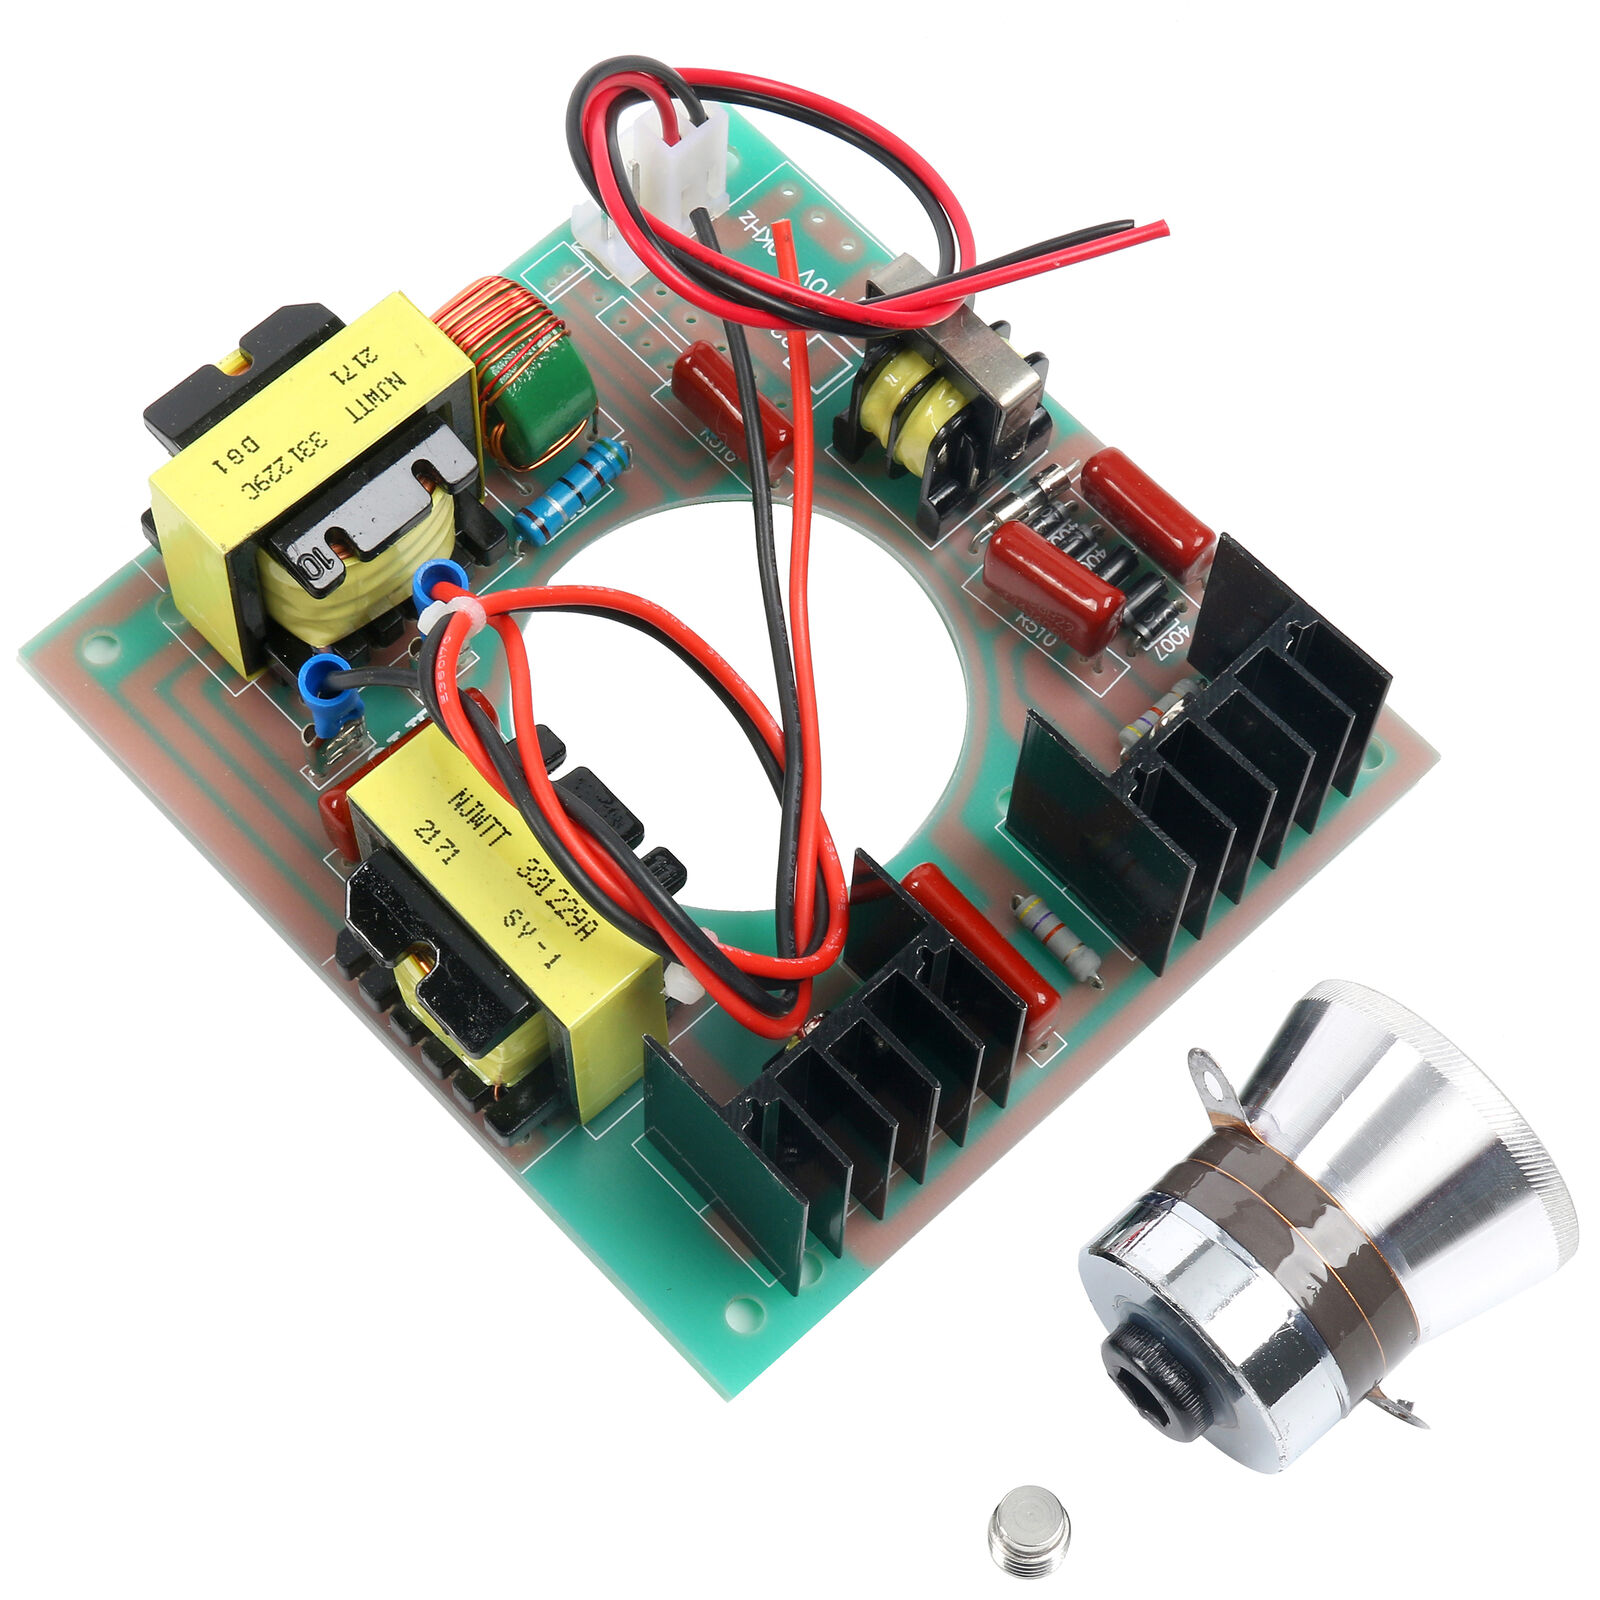 60W 40KHz Ultrasonic Cleaner Piezoelectric Cleaning Transducer Power Driverboard